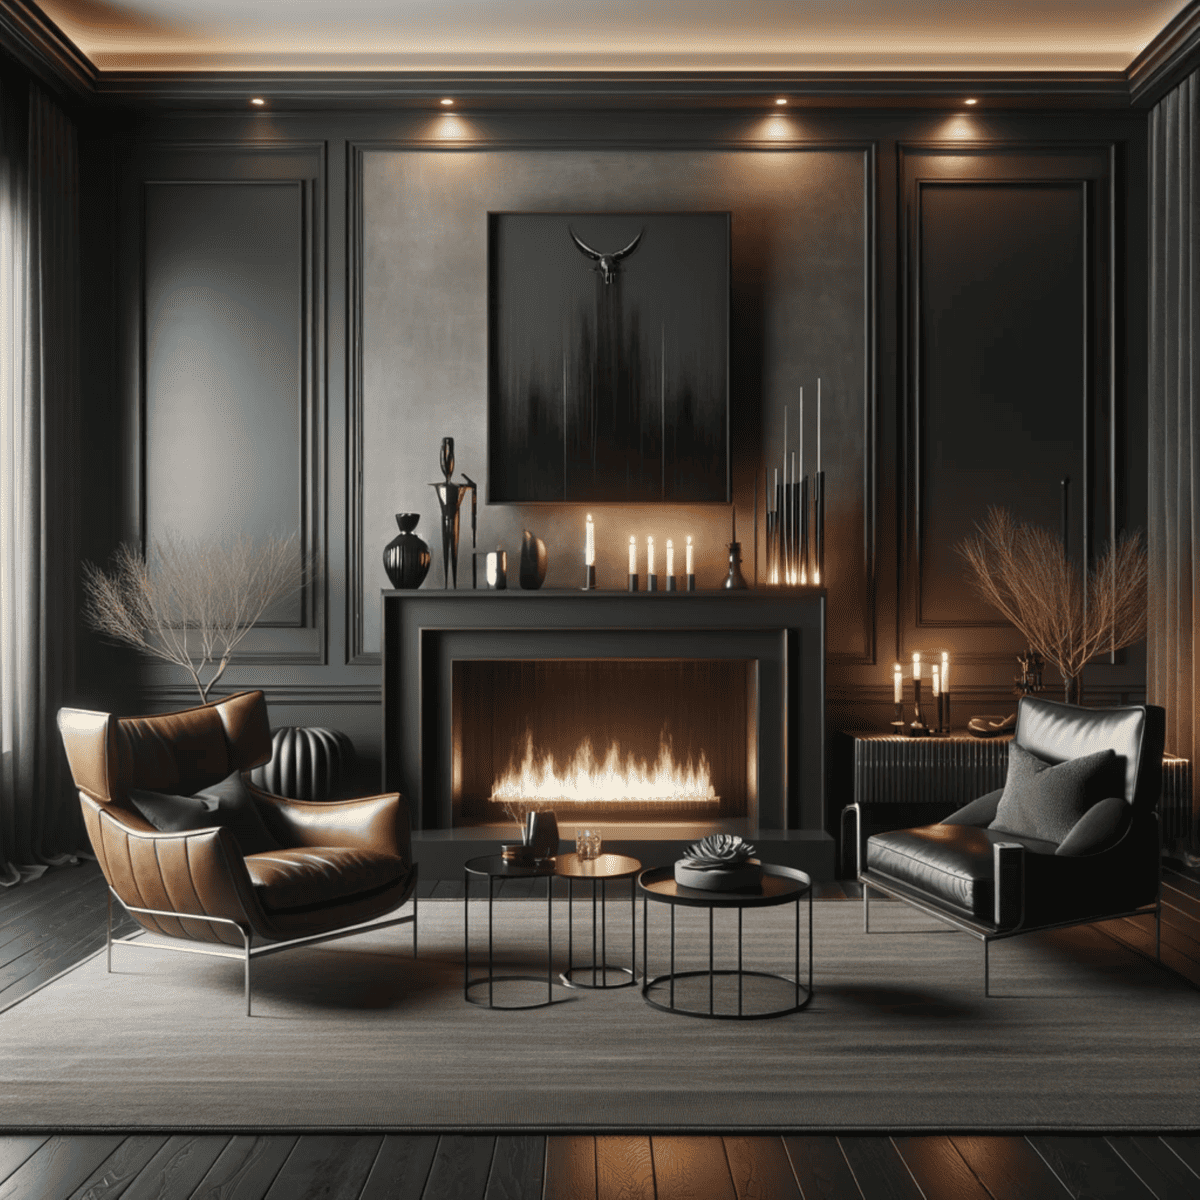 A luxurious living room with dark walls, sleek leather chairs, a modern fireplace with lit candles on the mantle. A western gothic atmosphere.